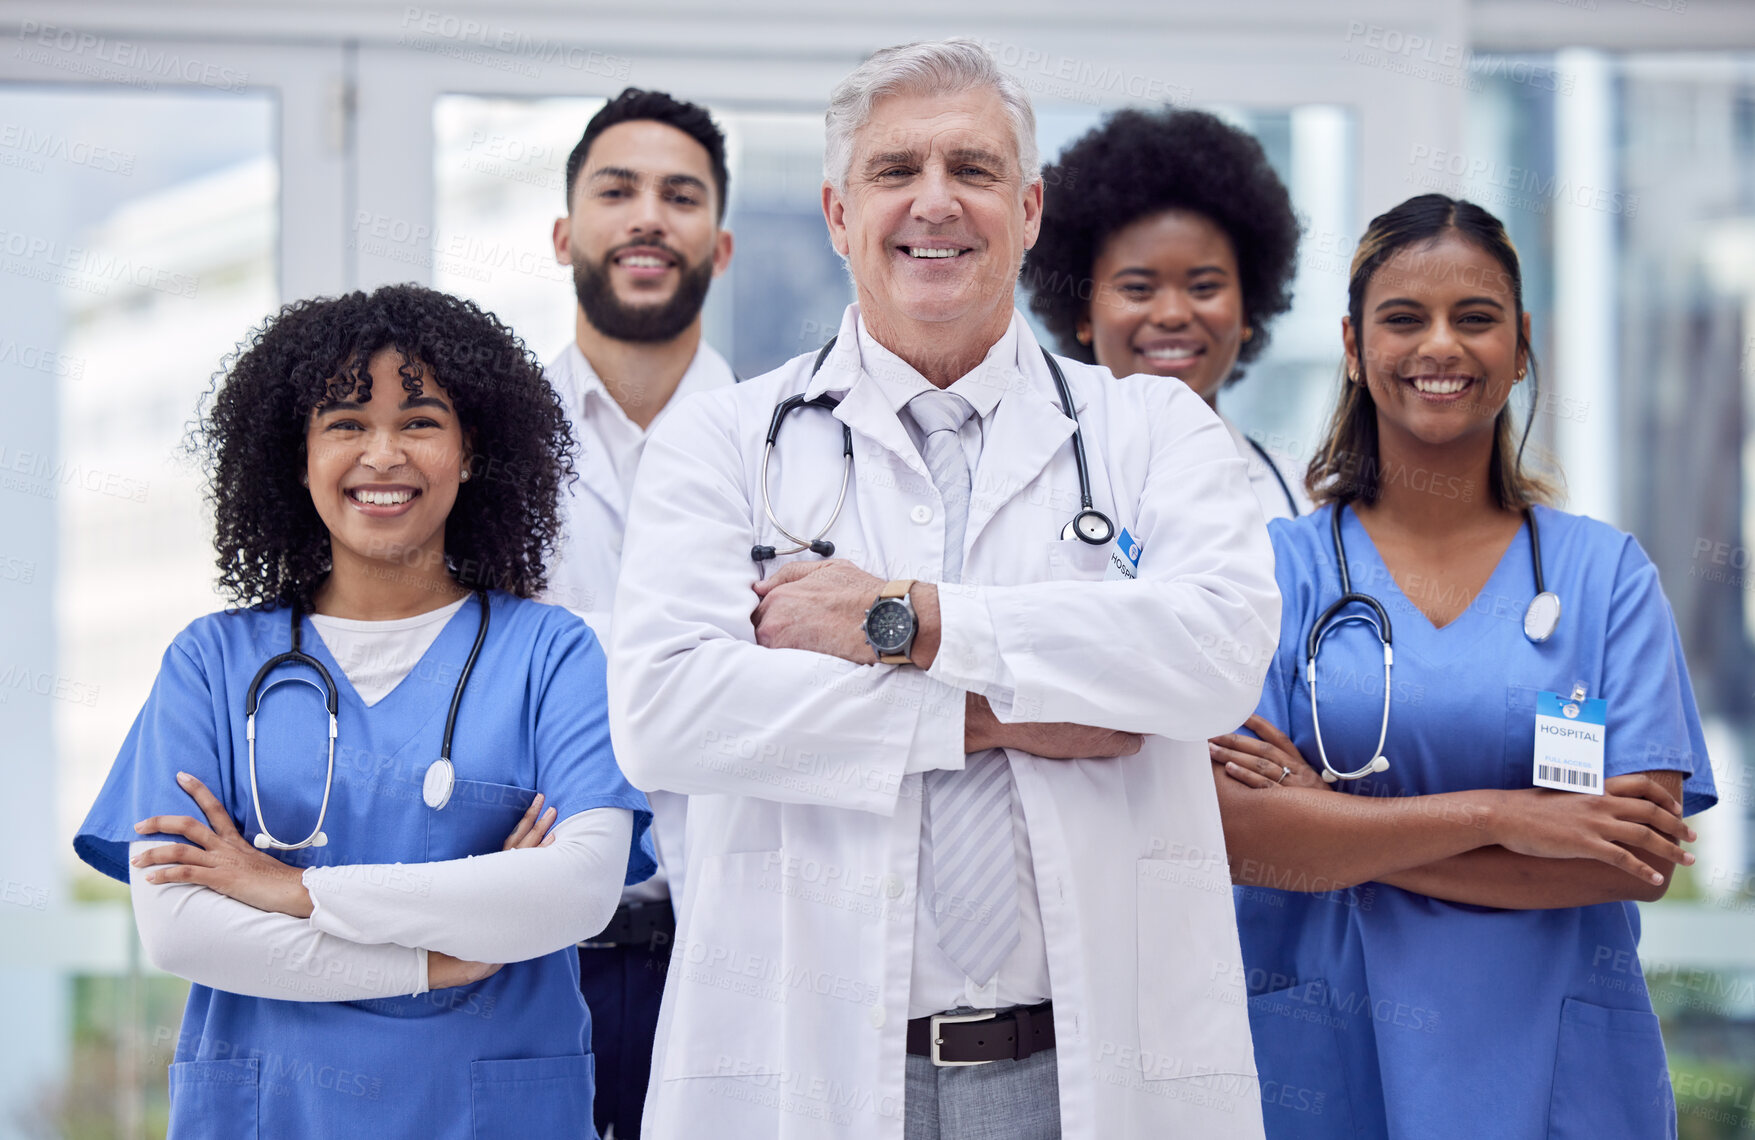 Buy stock photo Doctors, nurses and arms crossed portrait in diversity hospital, about us or leadership in people trust, community or support. Smile, happy and confident healthcare workers in teamwork collaboration